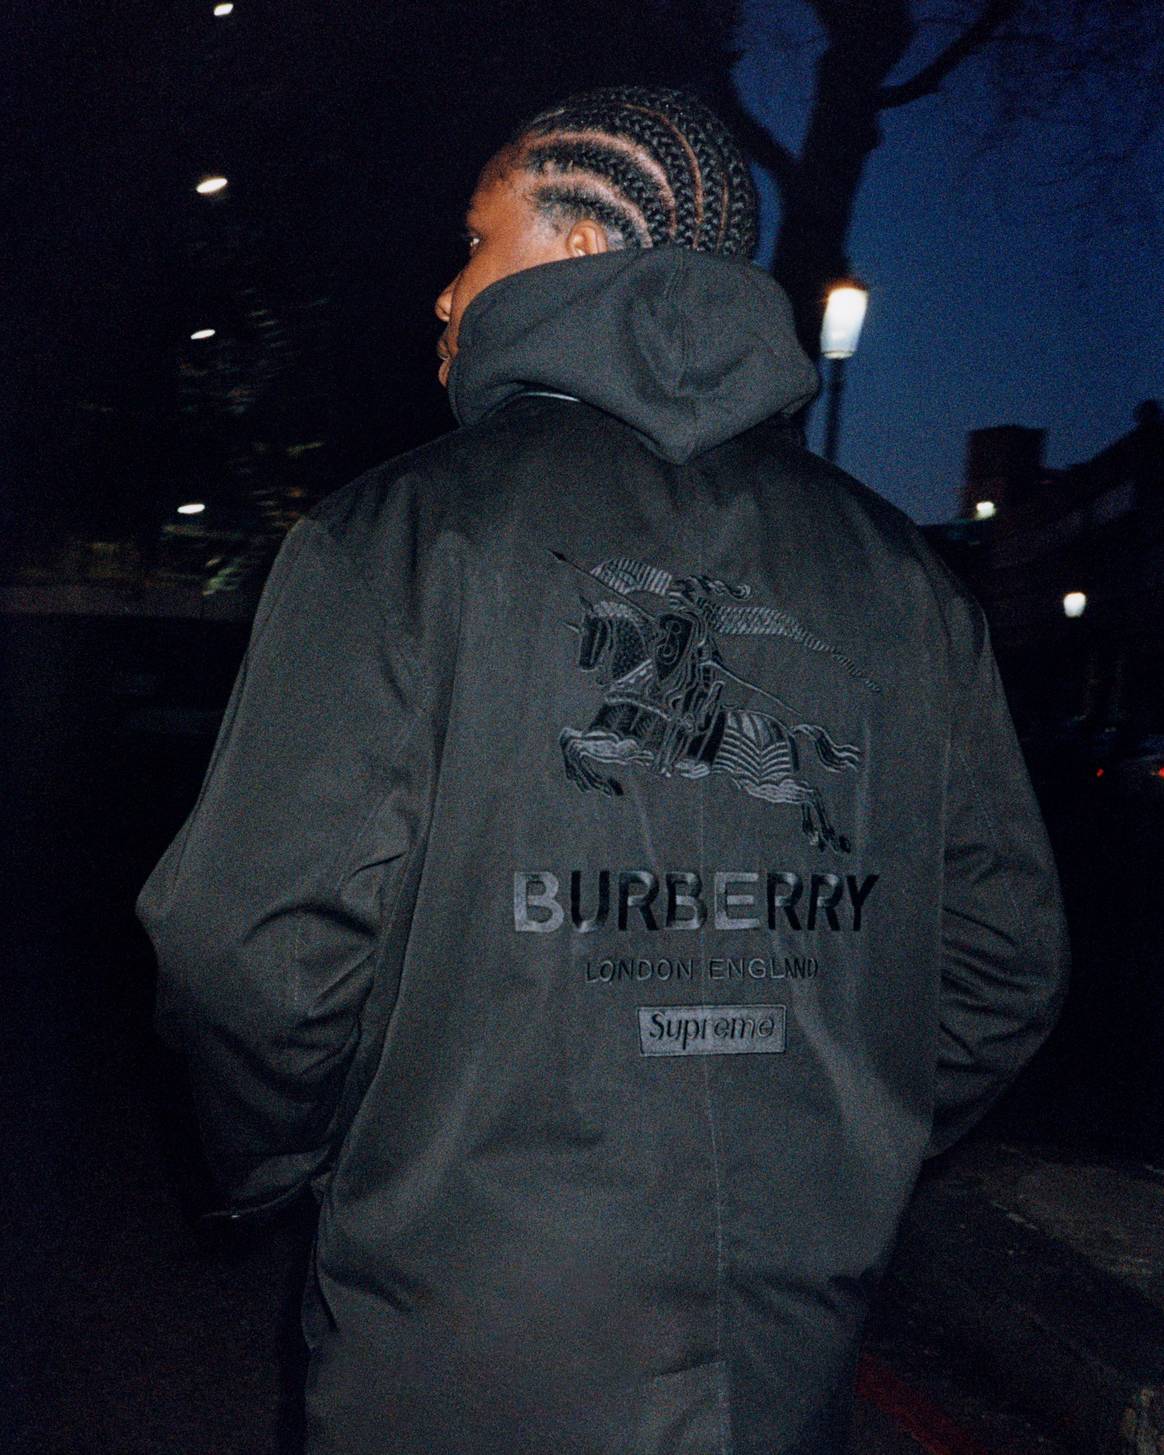 Image: Supreme/Burberry by Bolade Banjo